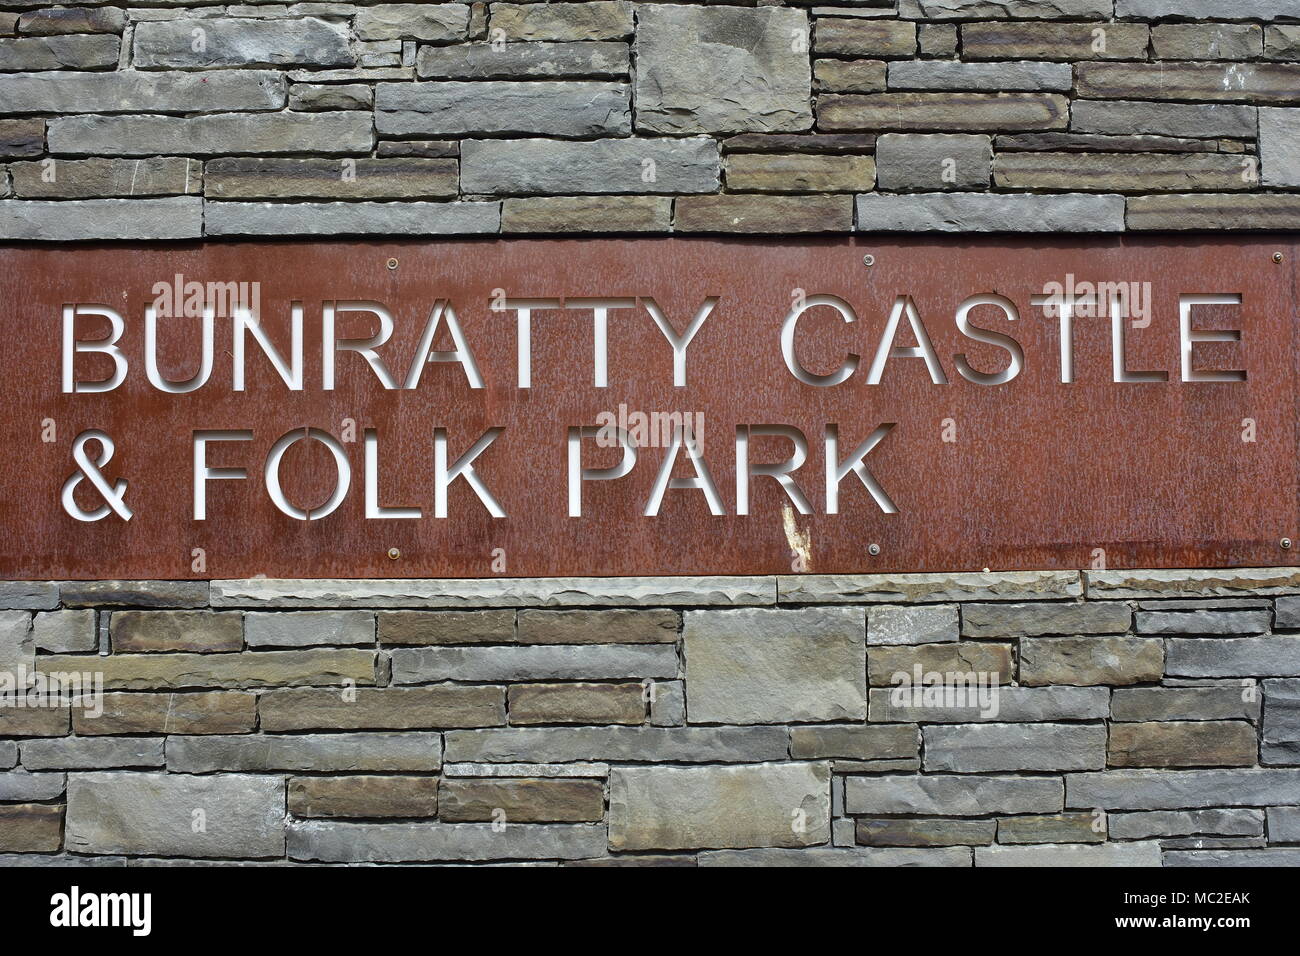 Bunratty Castle and folk park sign made from surface rusty steel sheet on gray slated wall. Stock Photo